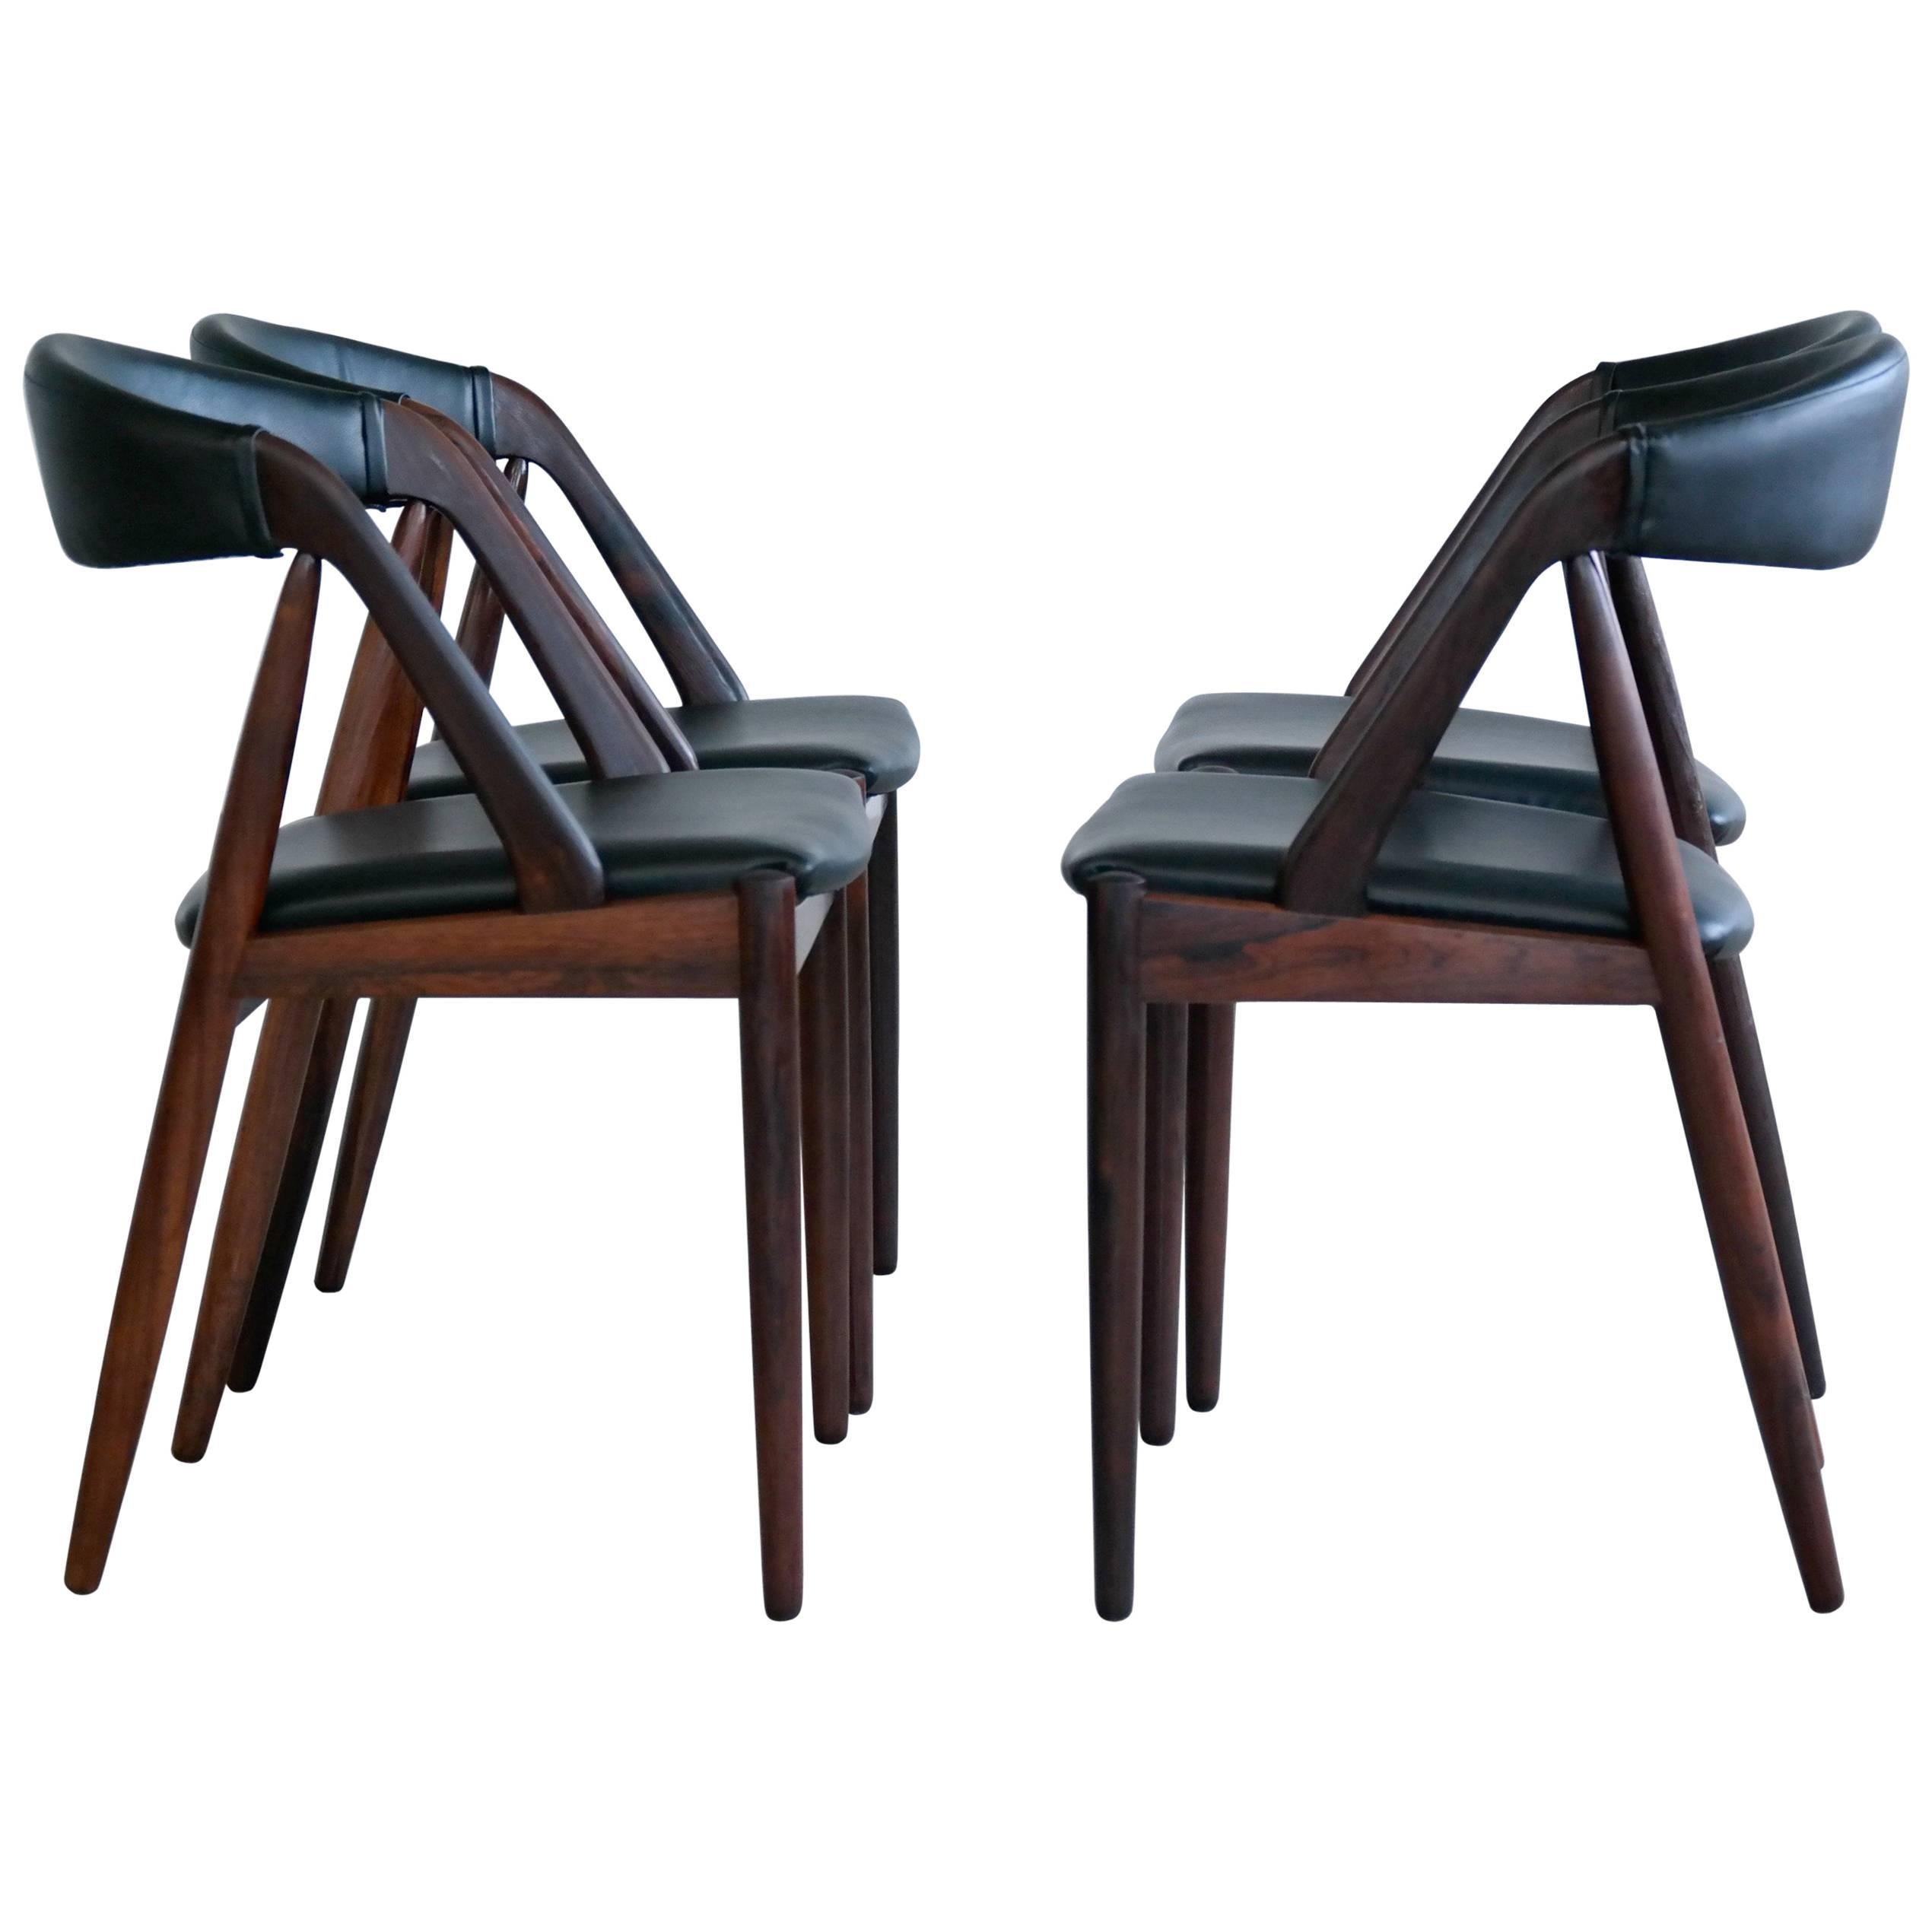  Kai Kristiansen Model 31 Set of Four Dining Chairs in Rosewood 